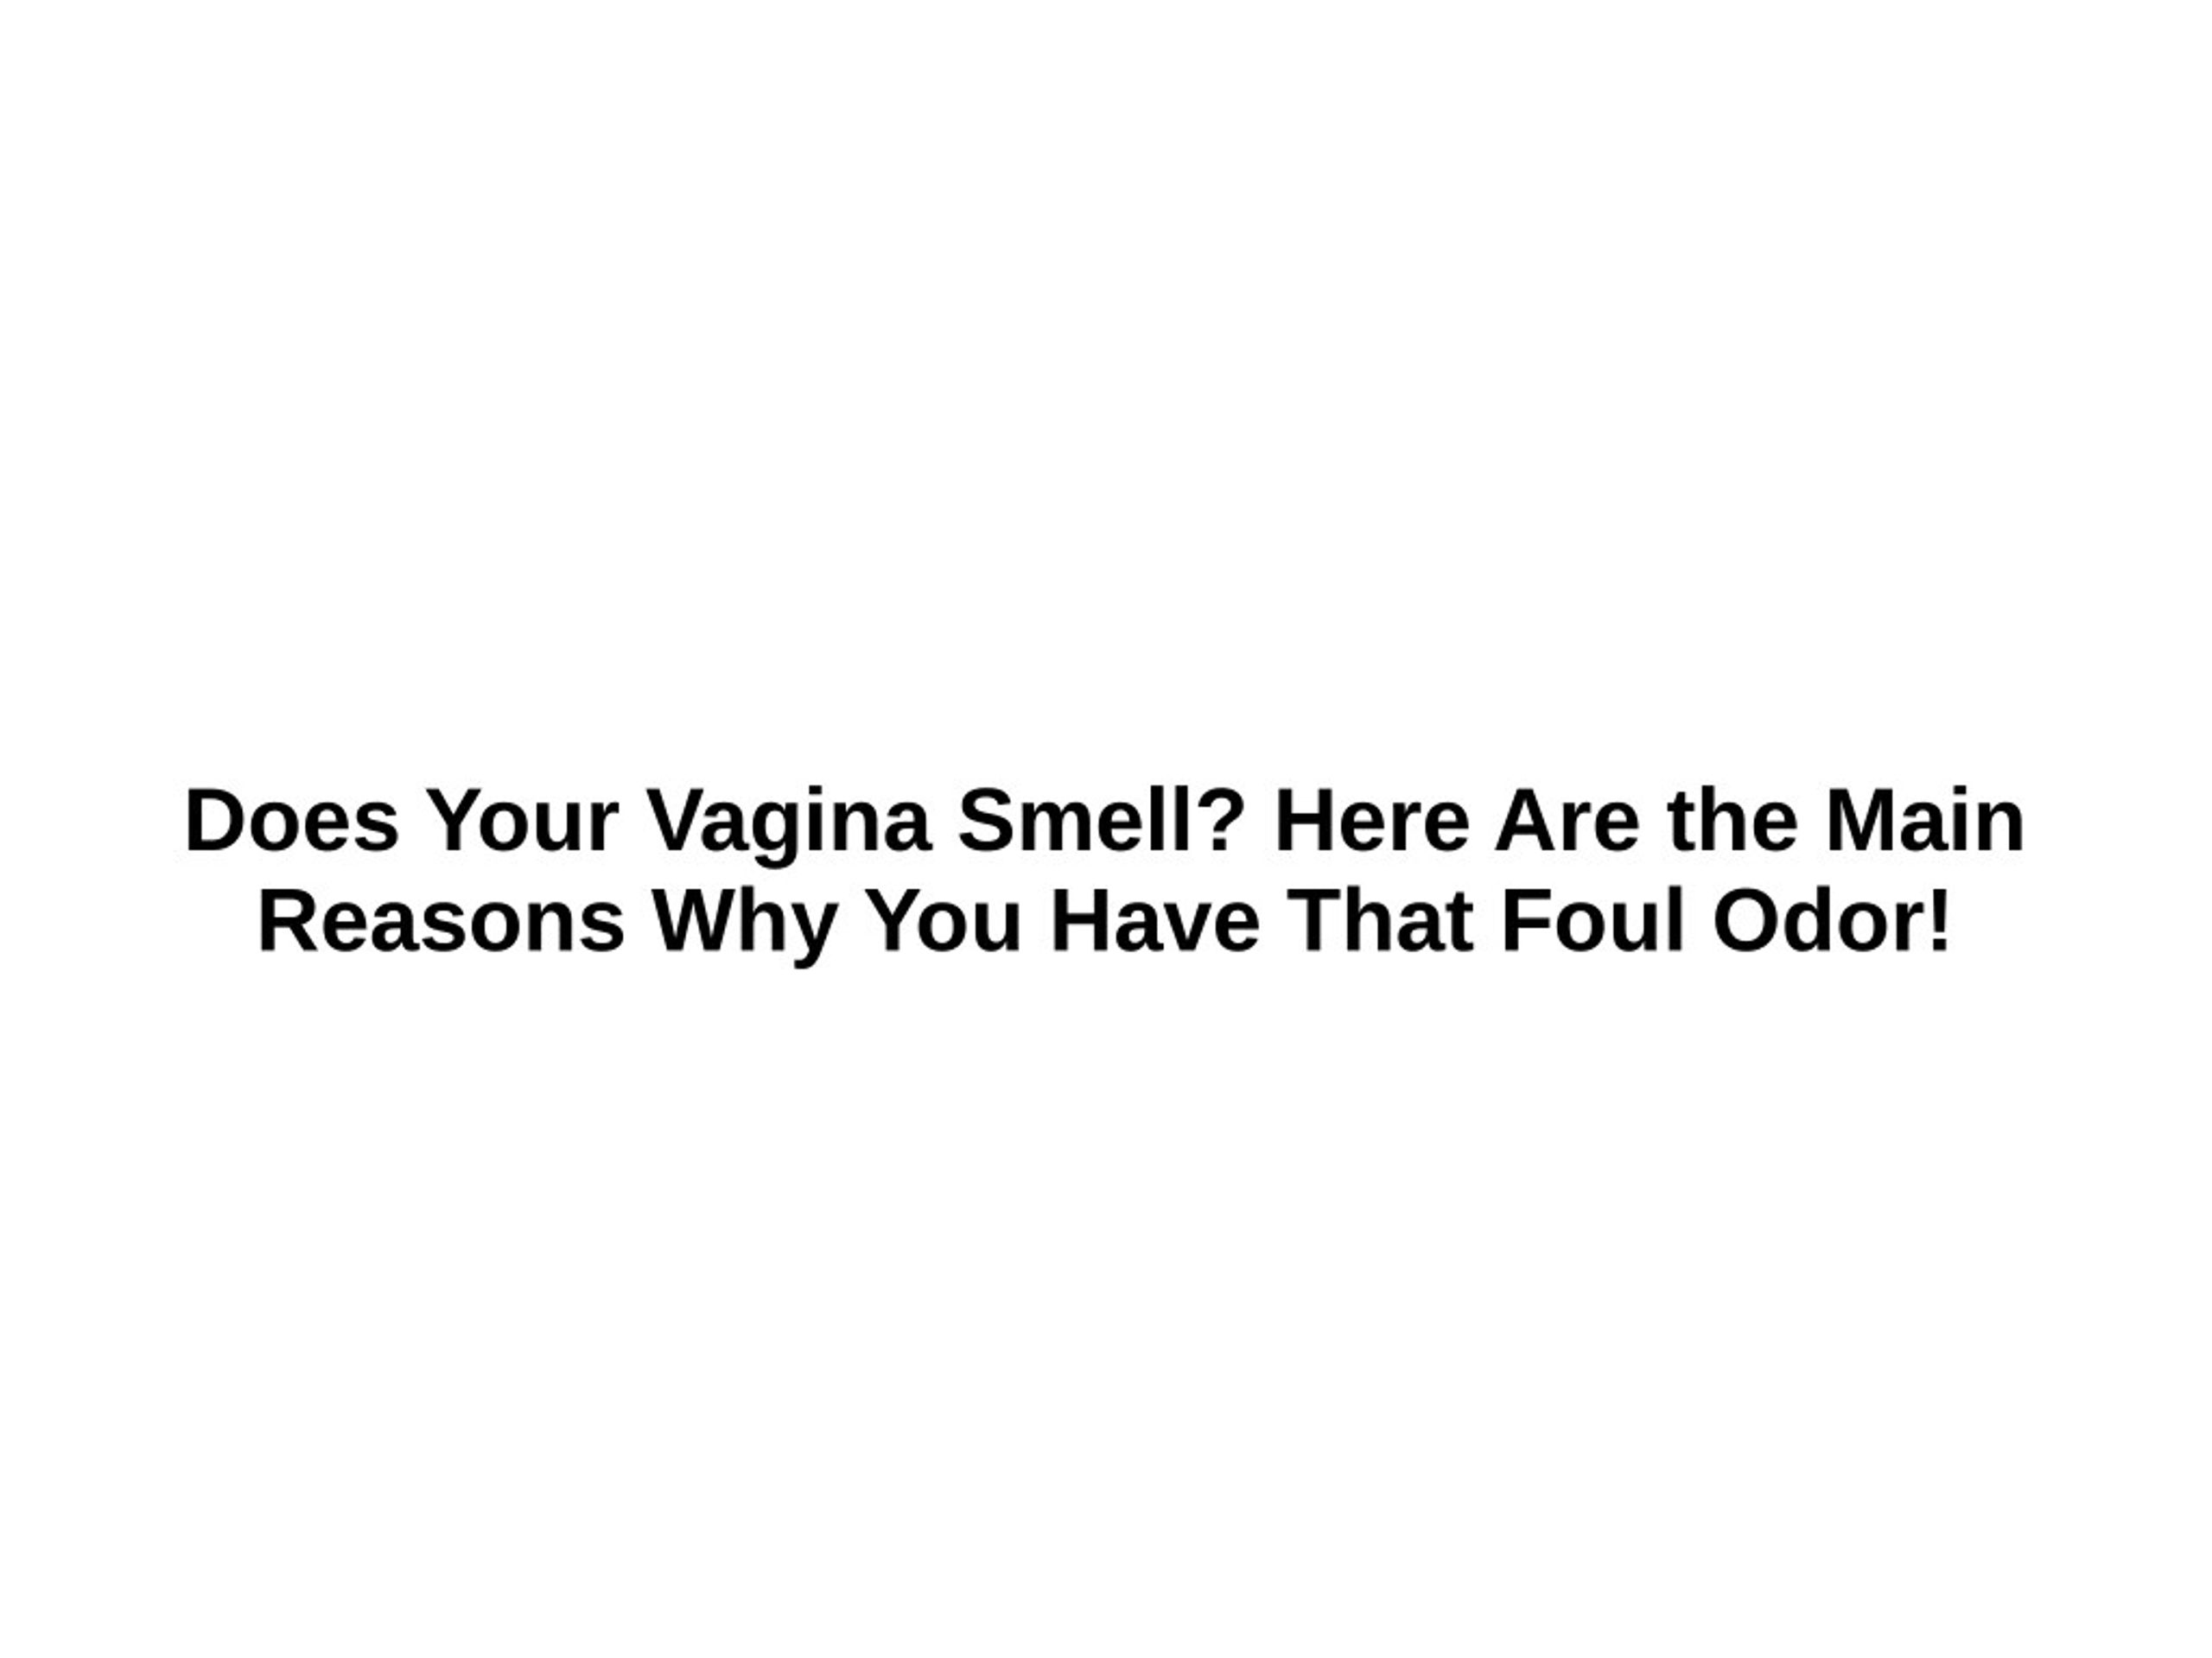 Ppt Does Your Vagina Smell Here Are The Main Reasons Why You Have That Foul Odor Powerpoint